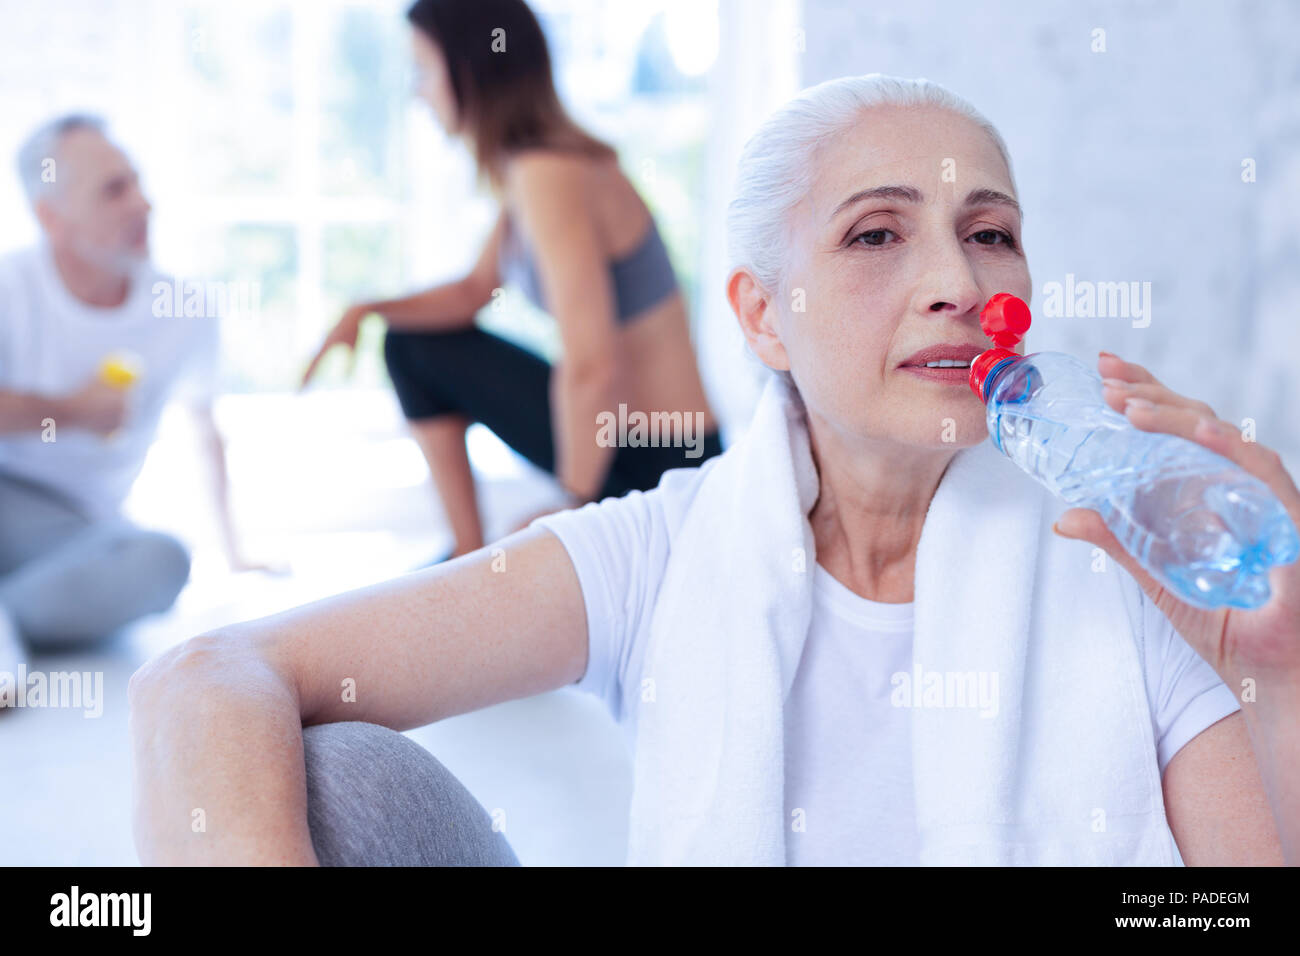 Attentive female going to refresh herself Stock Photo